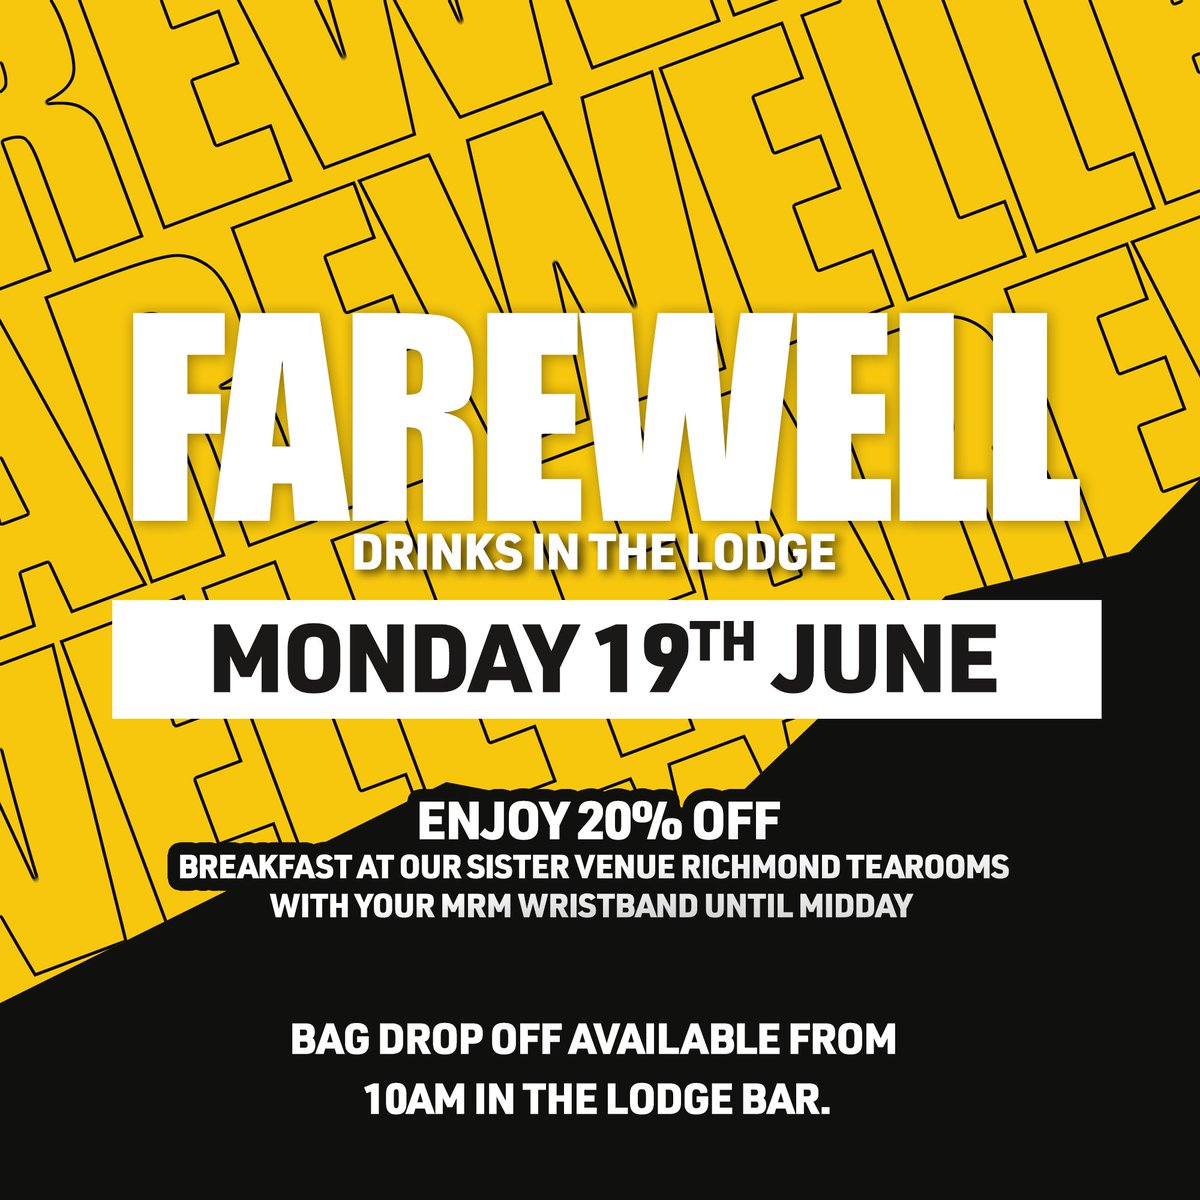 Let’s do one last day and night of rubber

Our sister venues @lodgebarMCR  @richmondtearoom are the places to be.

Drop your bags off at The Lodge and head over to Richmond Tearooms for 20% off food when you show your #mrm wristband

Eagle is open from 3pm with Happy Hour all day